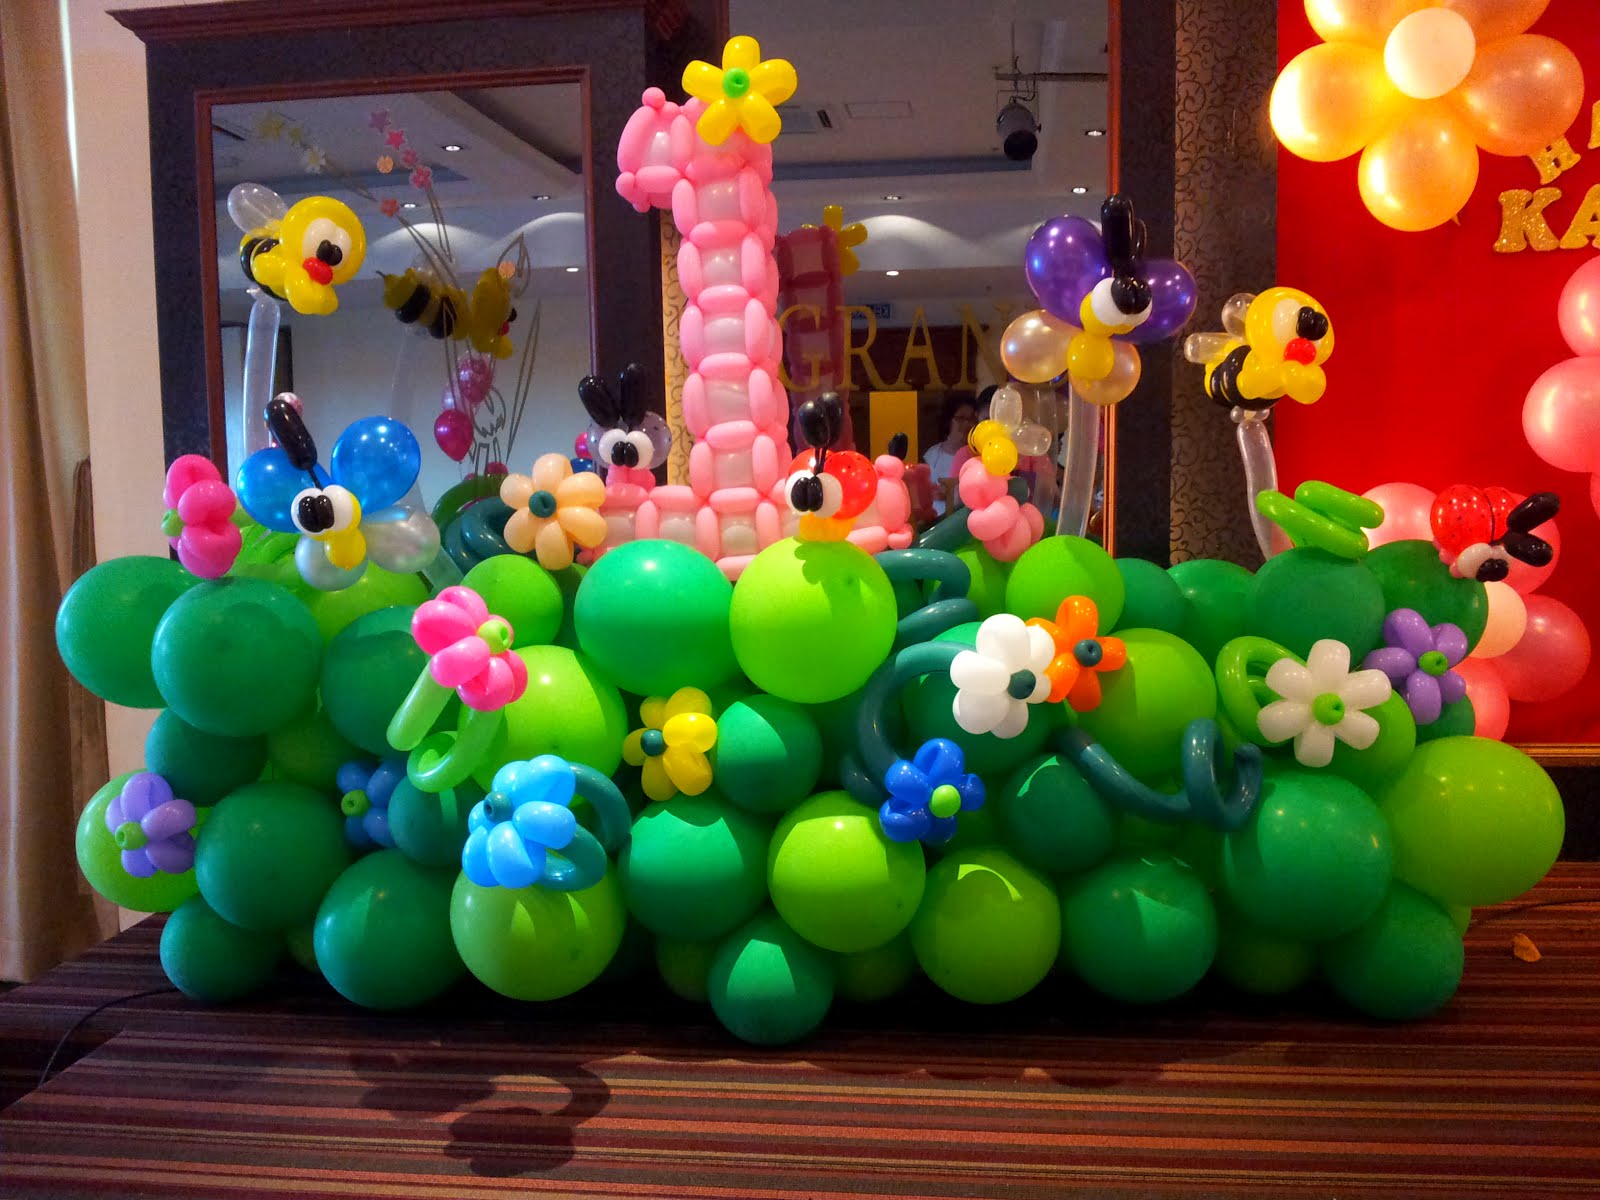  Balloon  decorations  for weddings birthday  parties  